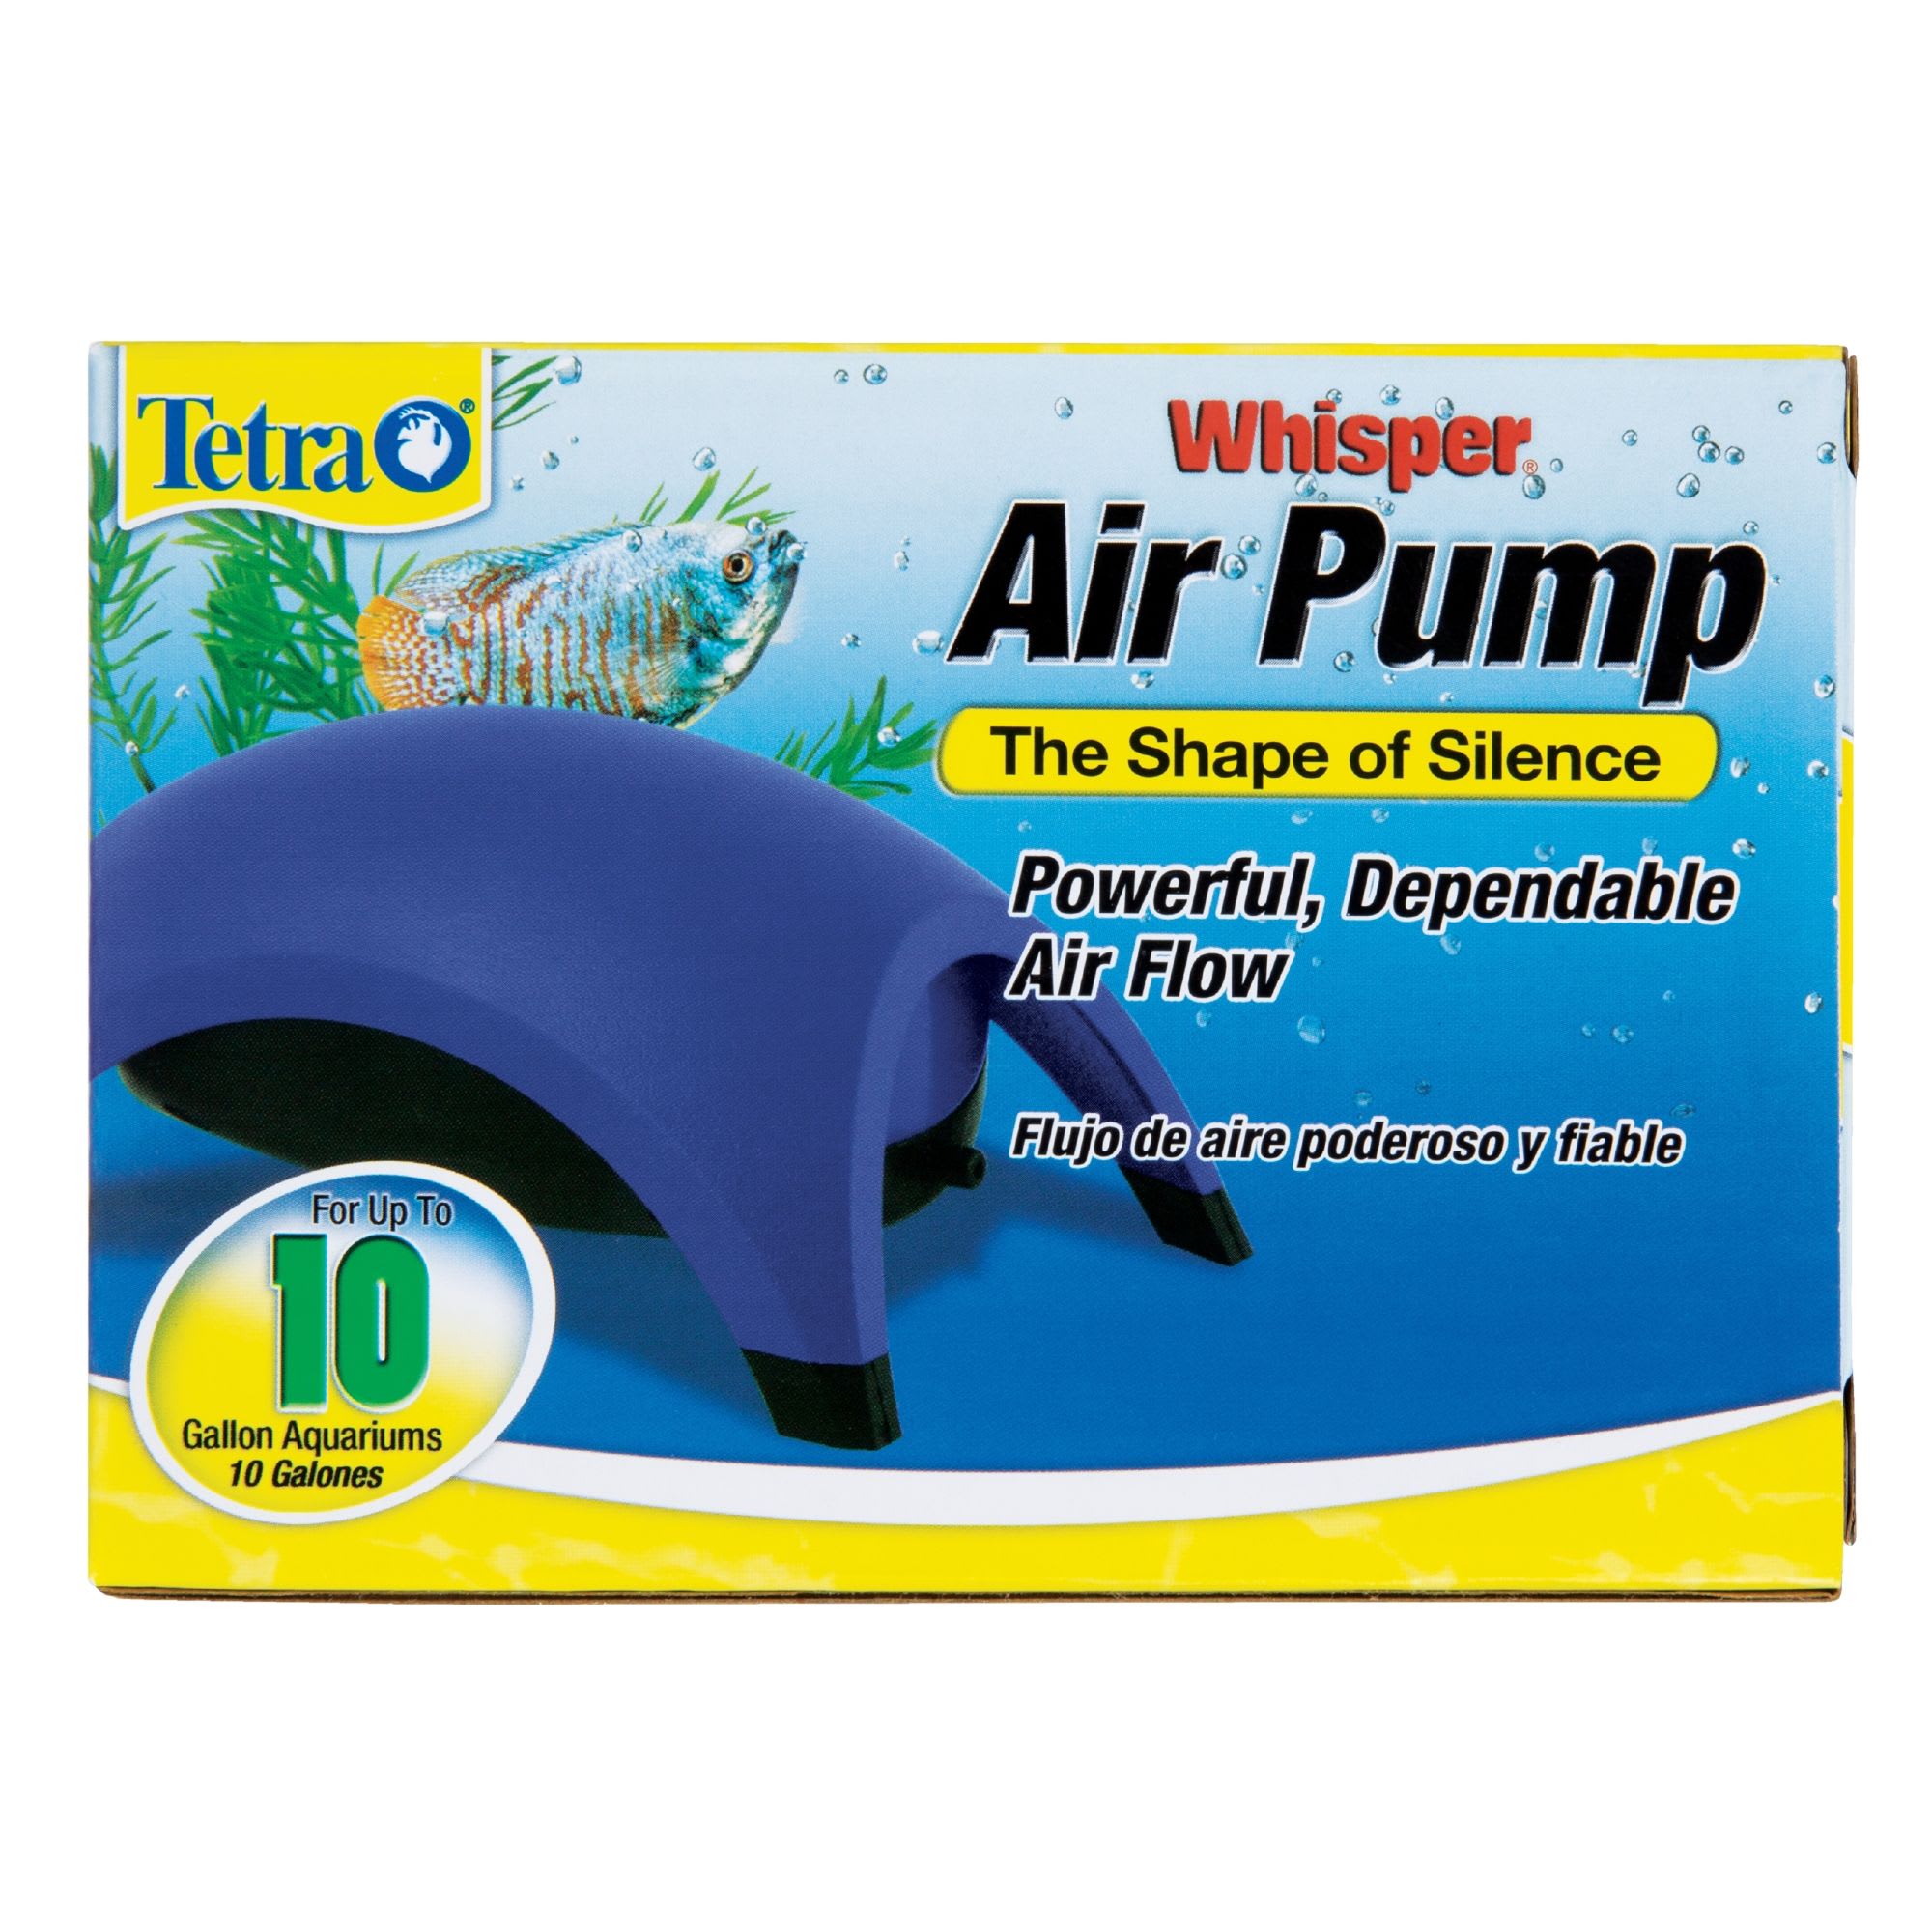 SILENT AIR PUMPS COMPLETE WITH AIR FLOW CONTROL 